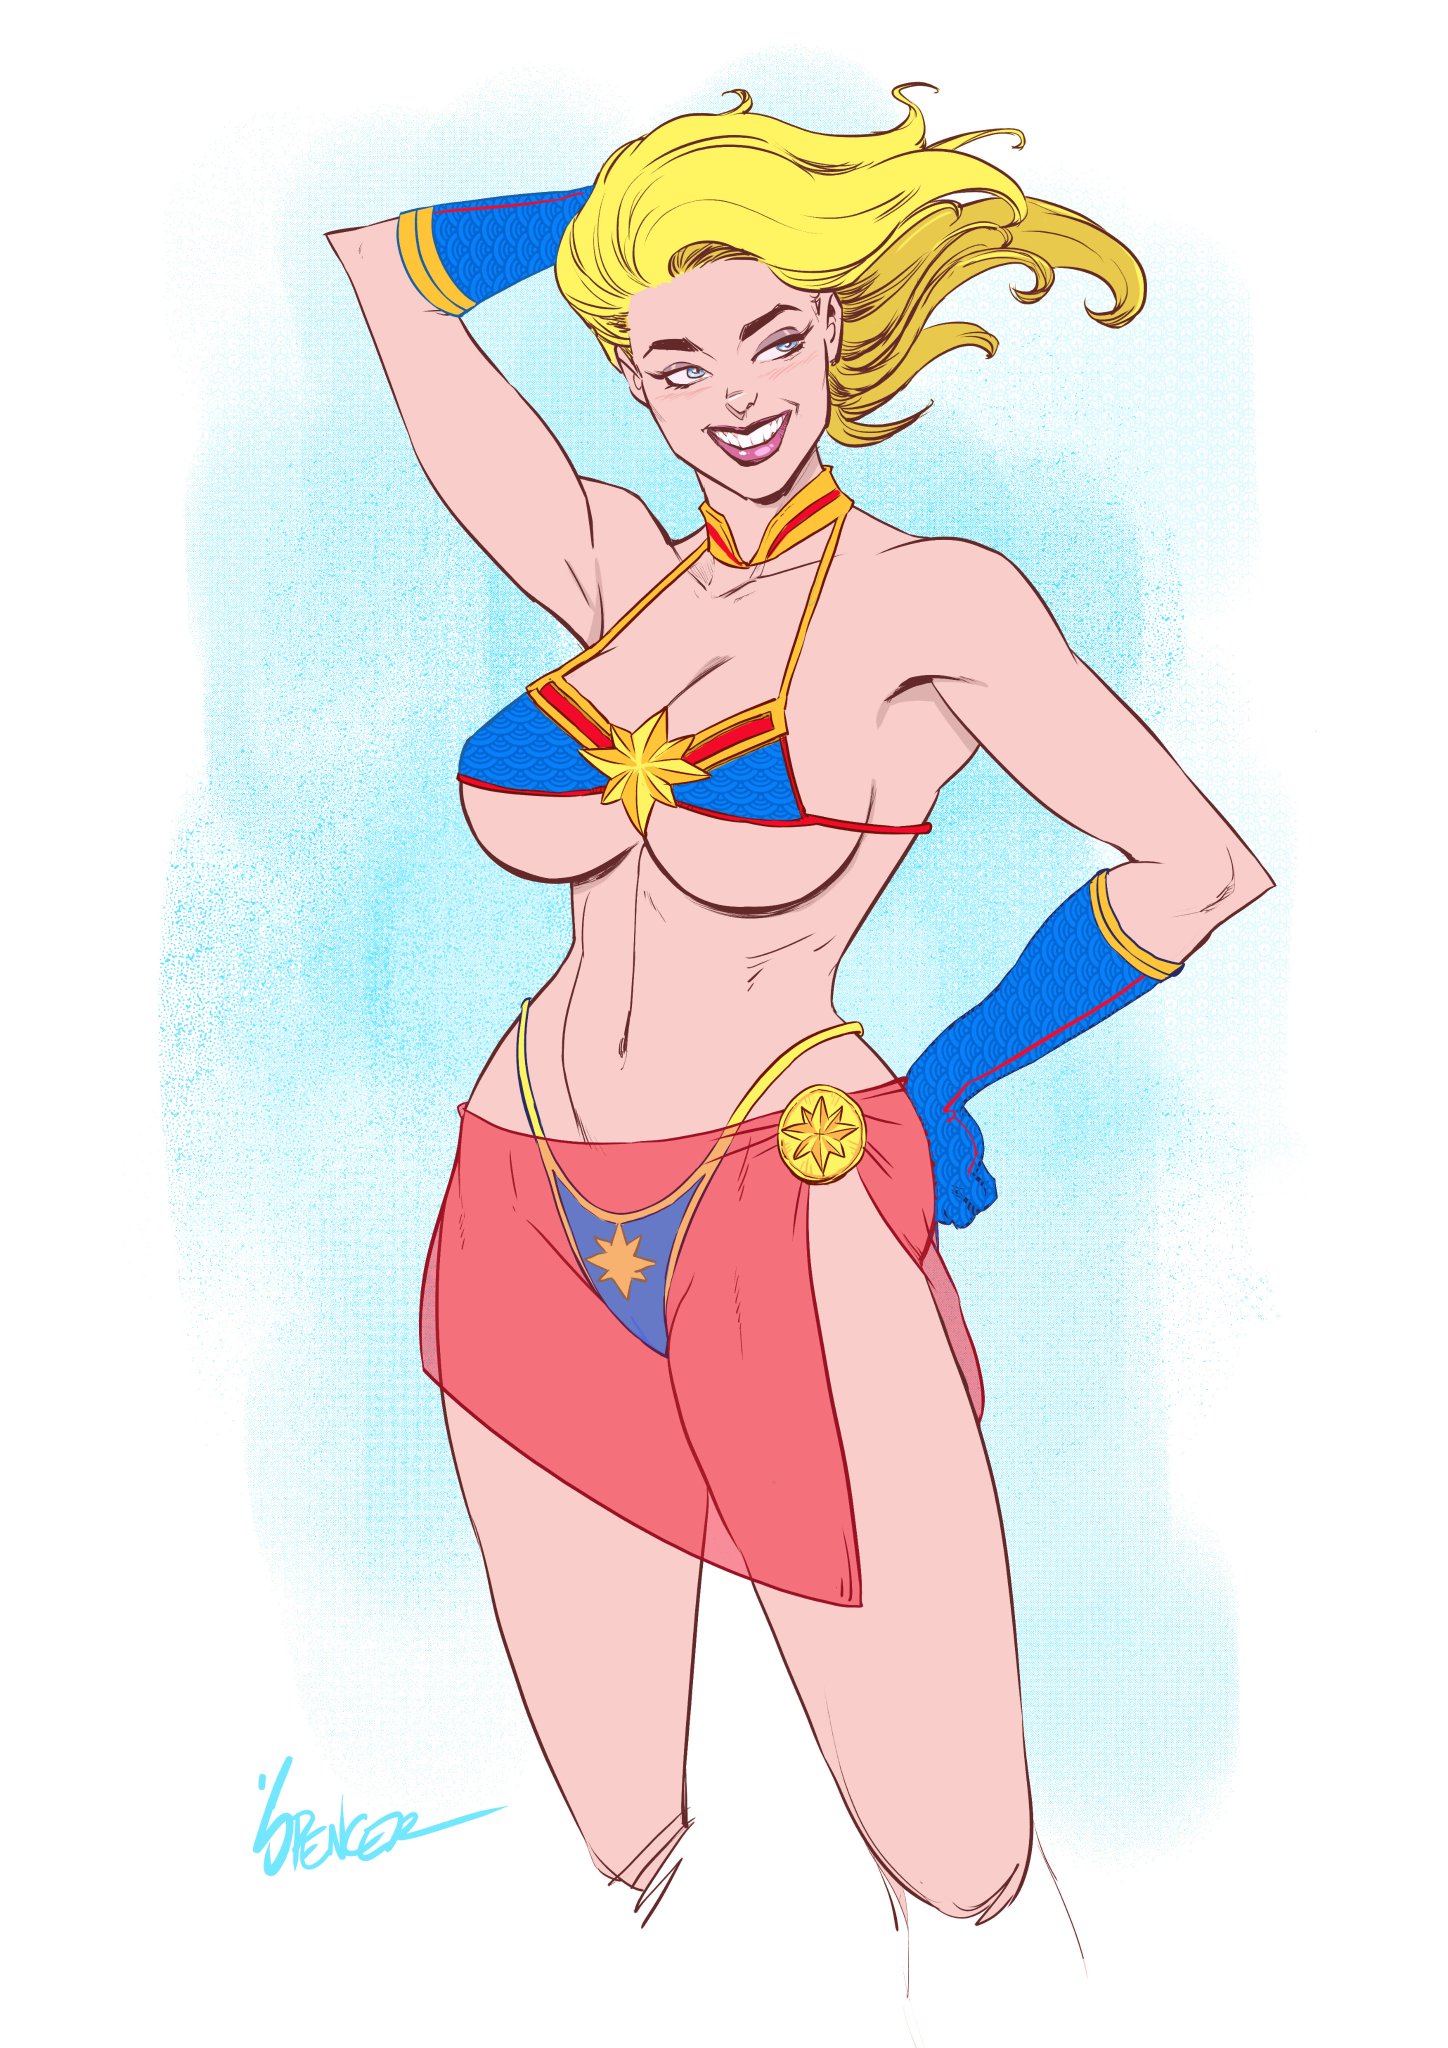 “Inspired by @PabloRomeroArt I have done my own Captain Marvel costume desi...